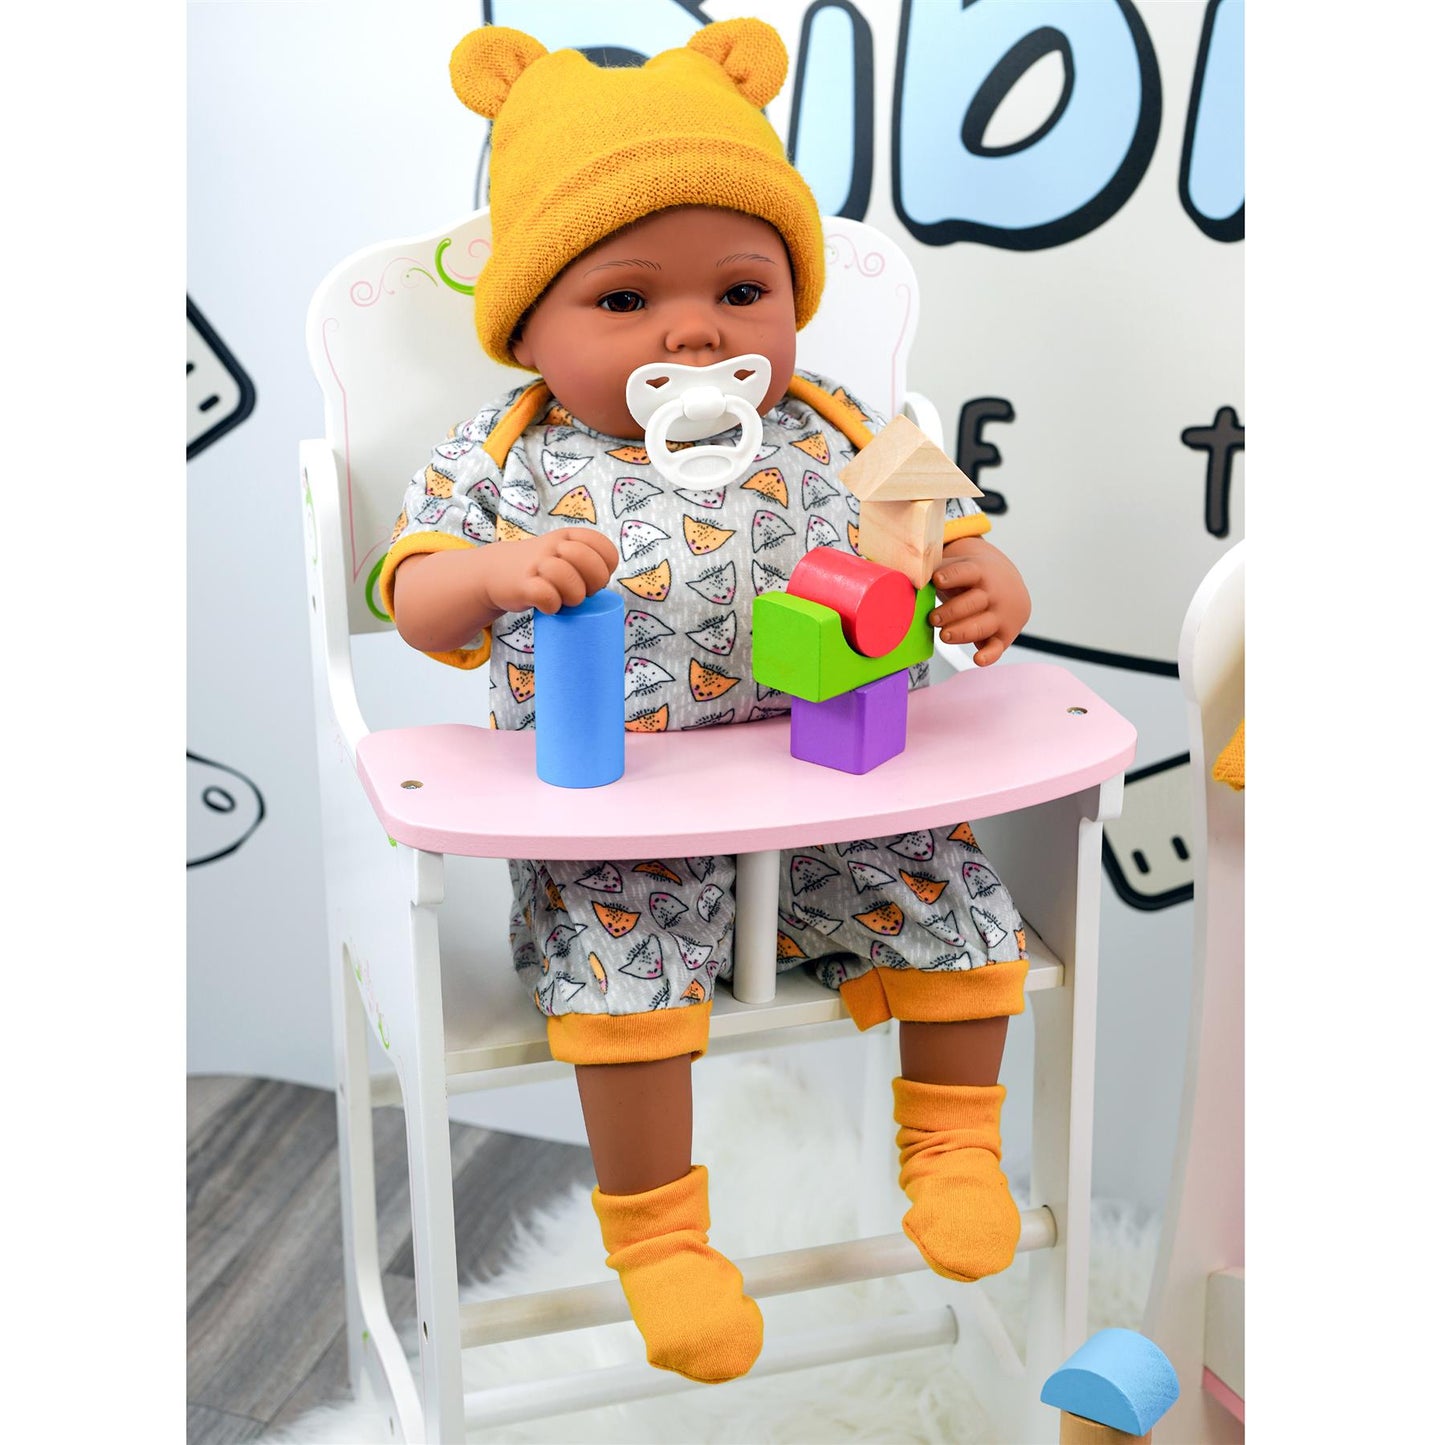 BiBi Outfits - Reborn Doll Clothes (Mouse) (50 cm / 20") by BiBi Doll - UKBuyZone